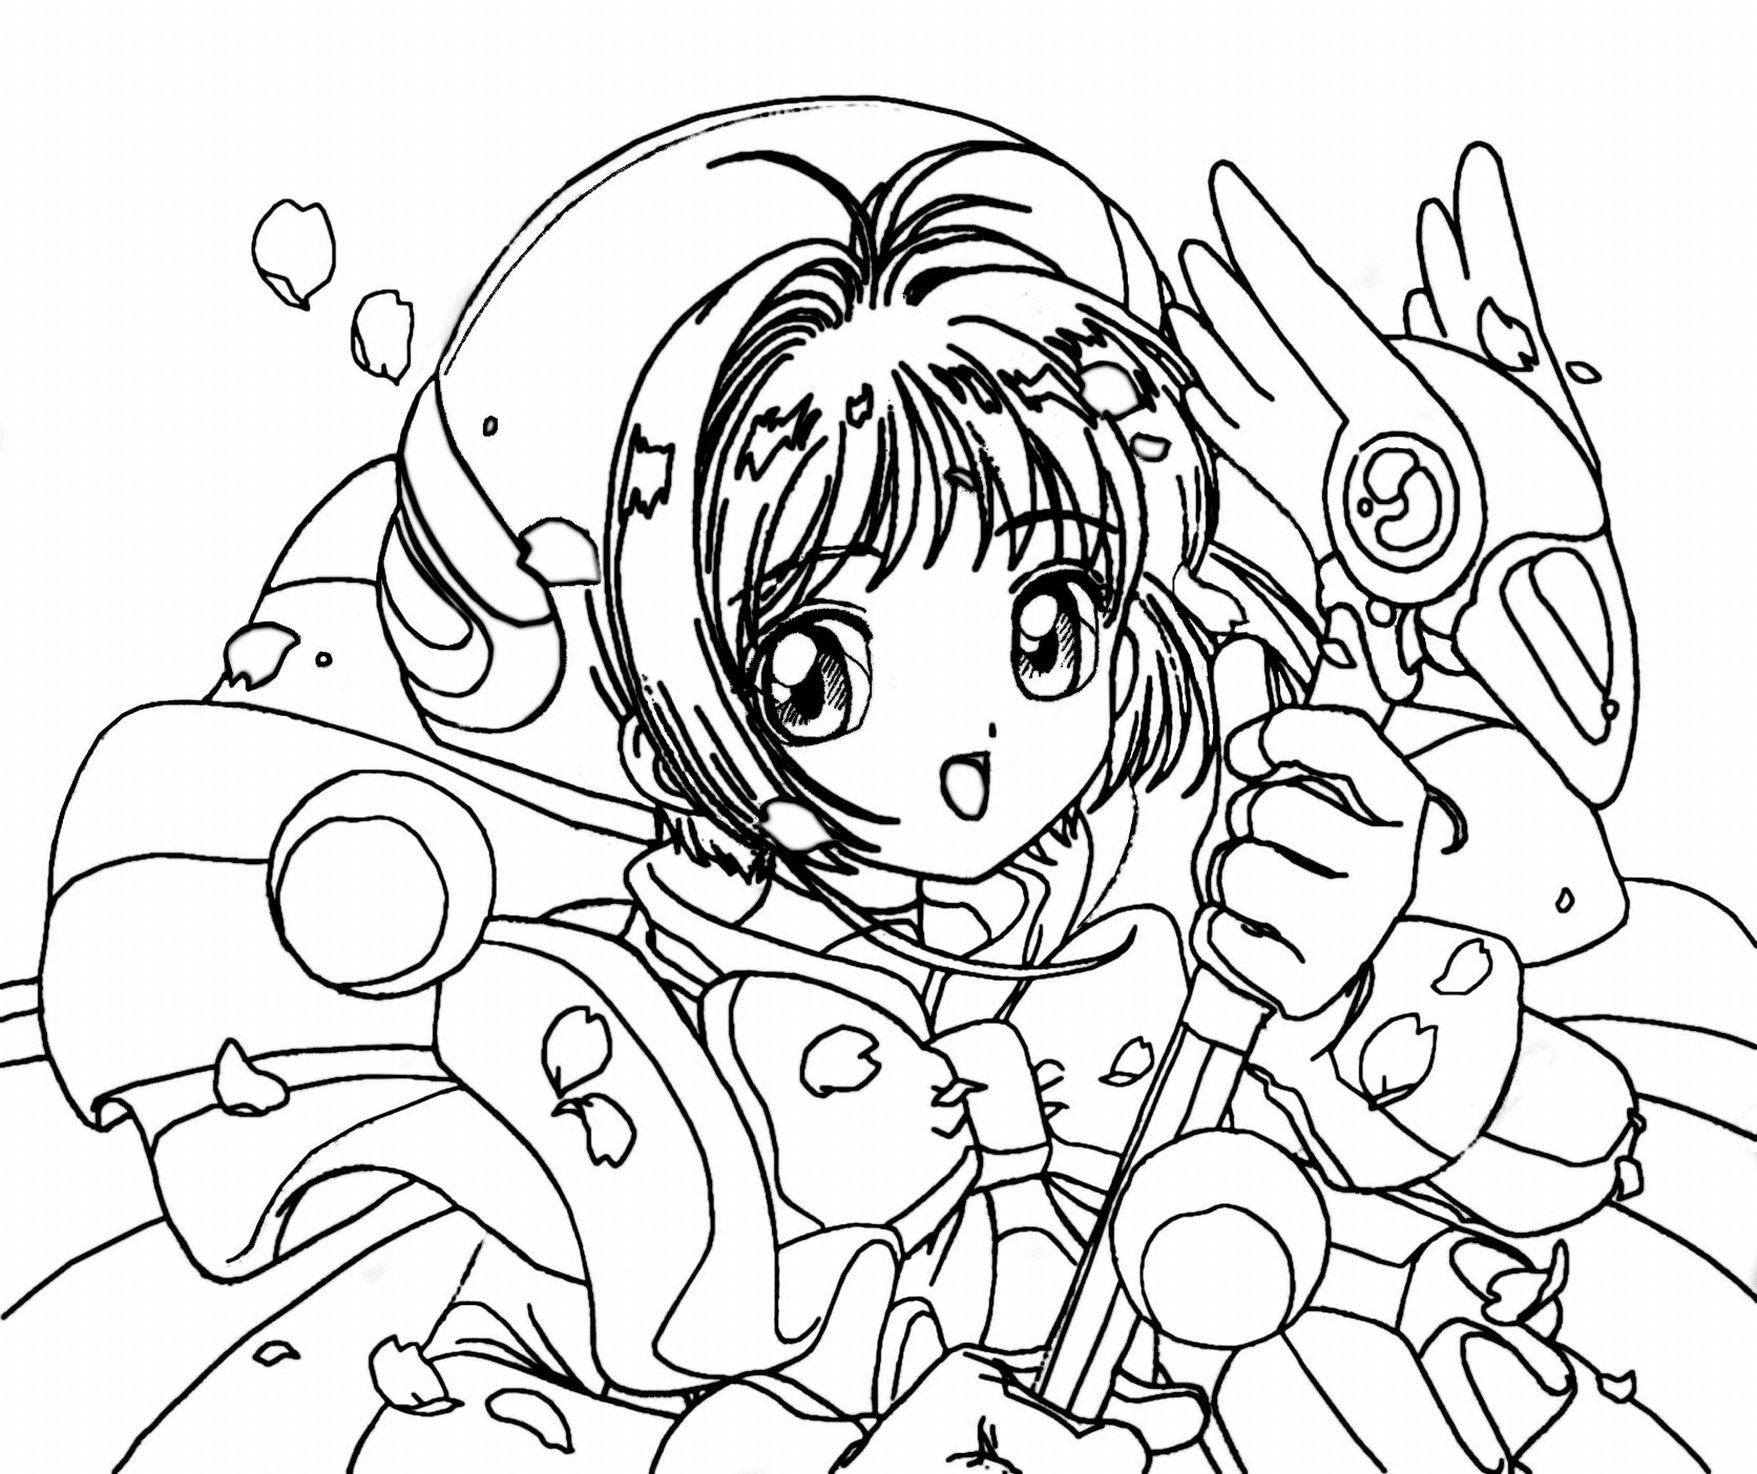 Anime Coloring Pages For Kids - Coloring Home